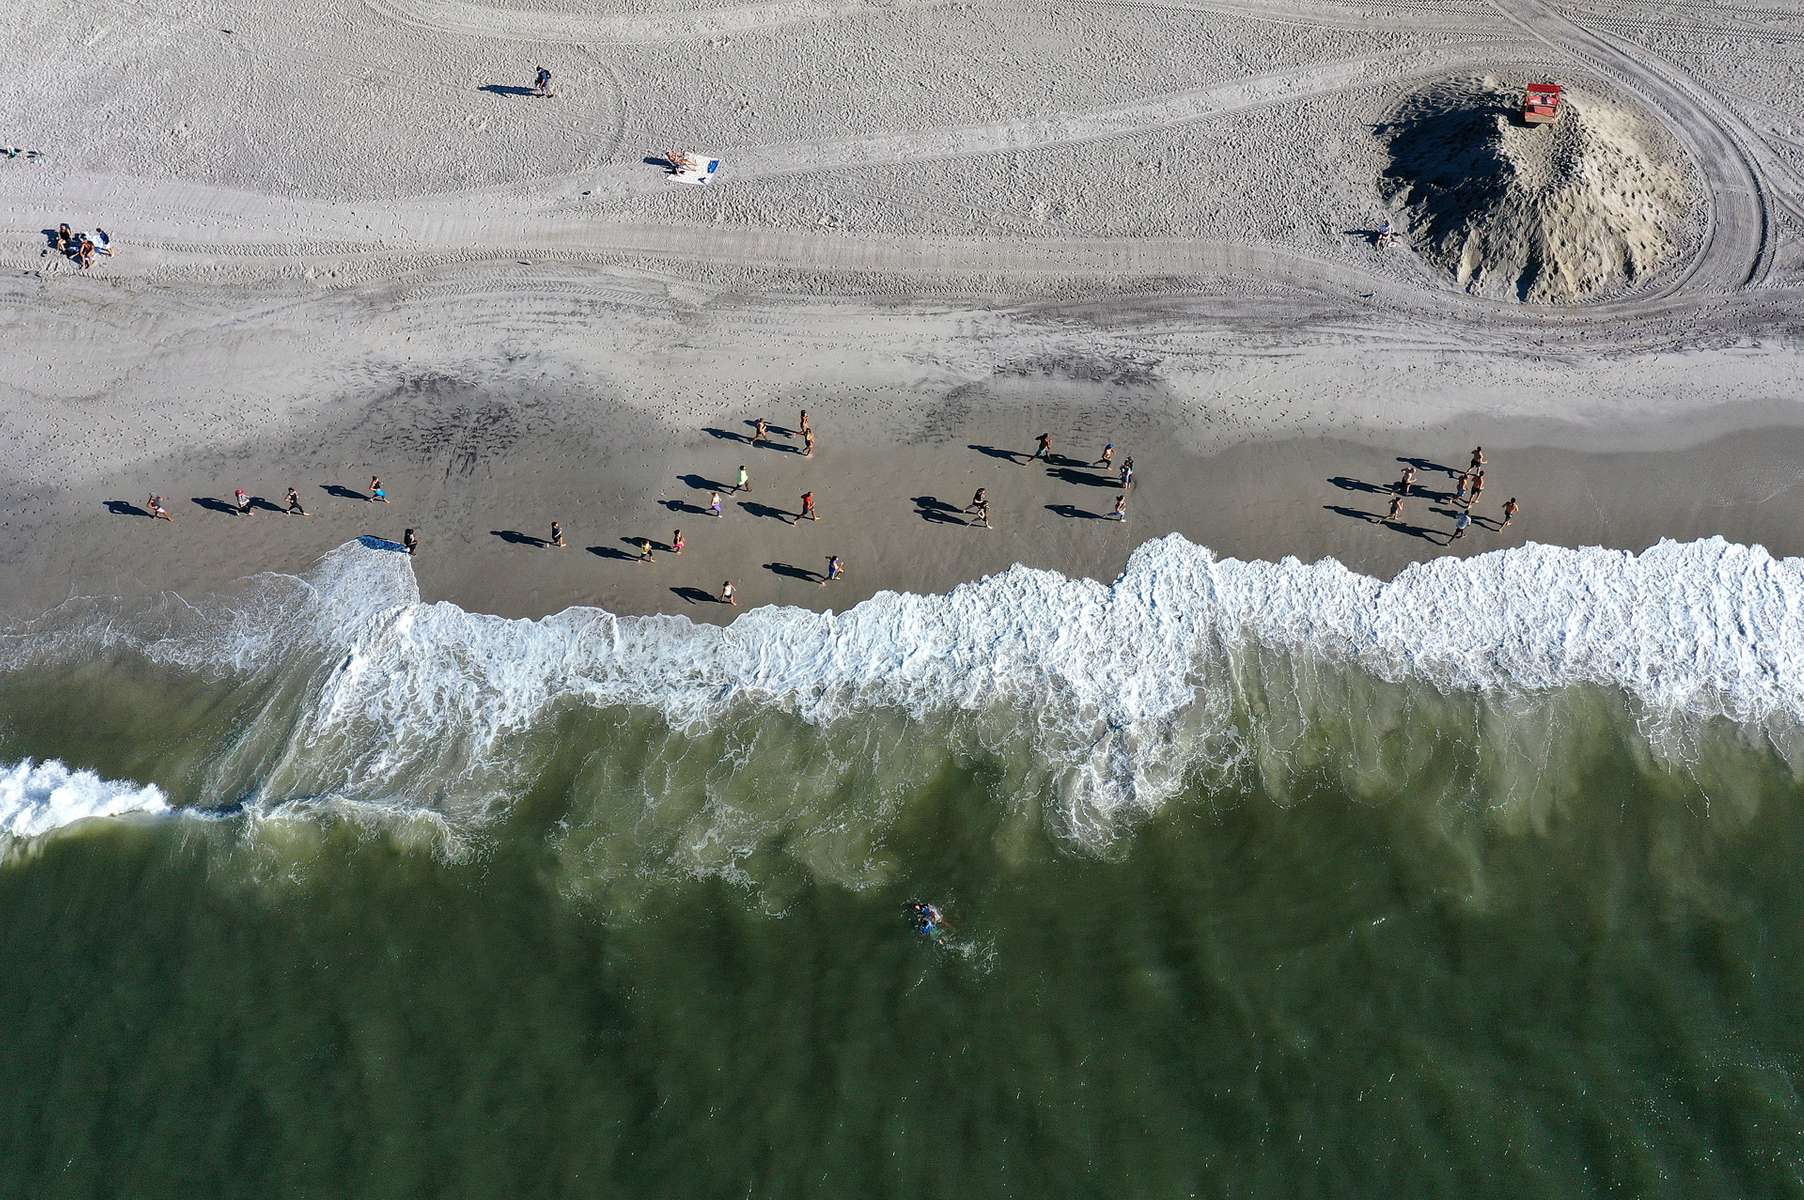 An aerial view of members of the {quote}Life Outside The Box {quote} Fitness Club during a training session led by fitness instructor Alexa Hoovis at the beach on August 18, 2020 in Long Beach, New York.  Gyms, which have been closed in New York since mid-March to help prevent the spread of the coronavirus, will be allowed to open again as soon as August 24th Governor Andrew Cuomo has announced.  Gyms will be limited to a third of their capacity, and they need to maintain a sign-in sheet to help contact tracers in case of a virus outbreak. Air filters must be able to help prevent the transmission of viral particles. People must wear masks at all times. 